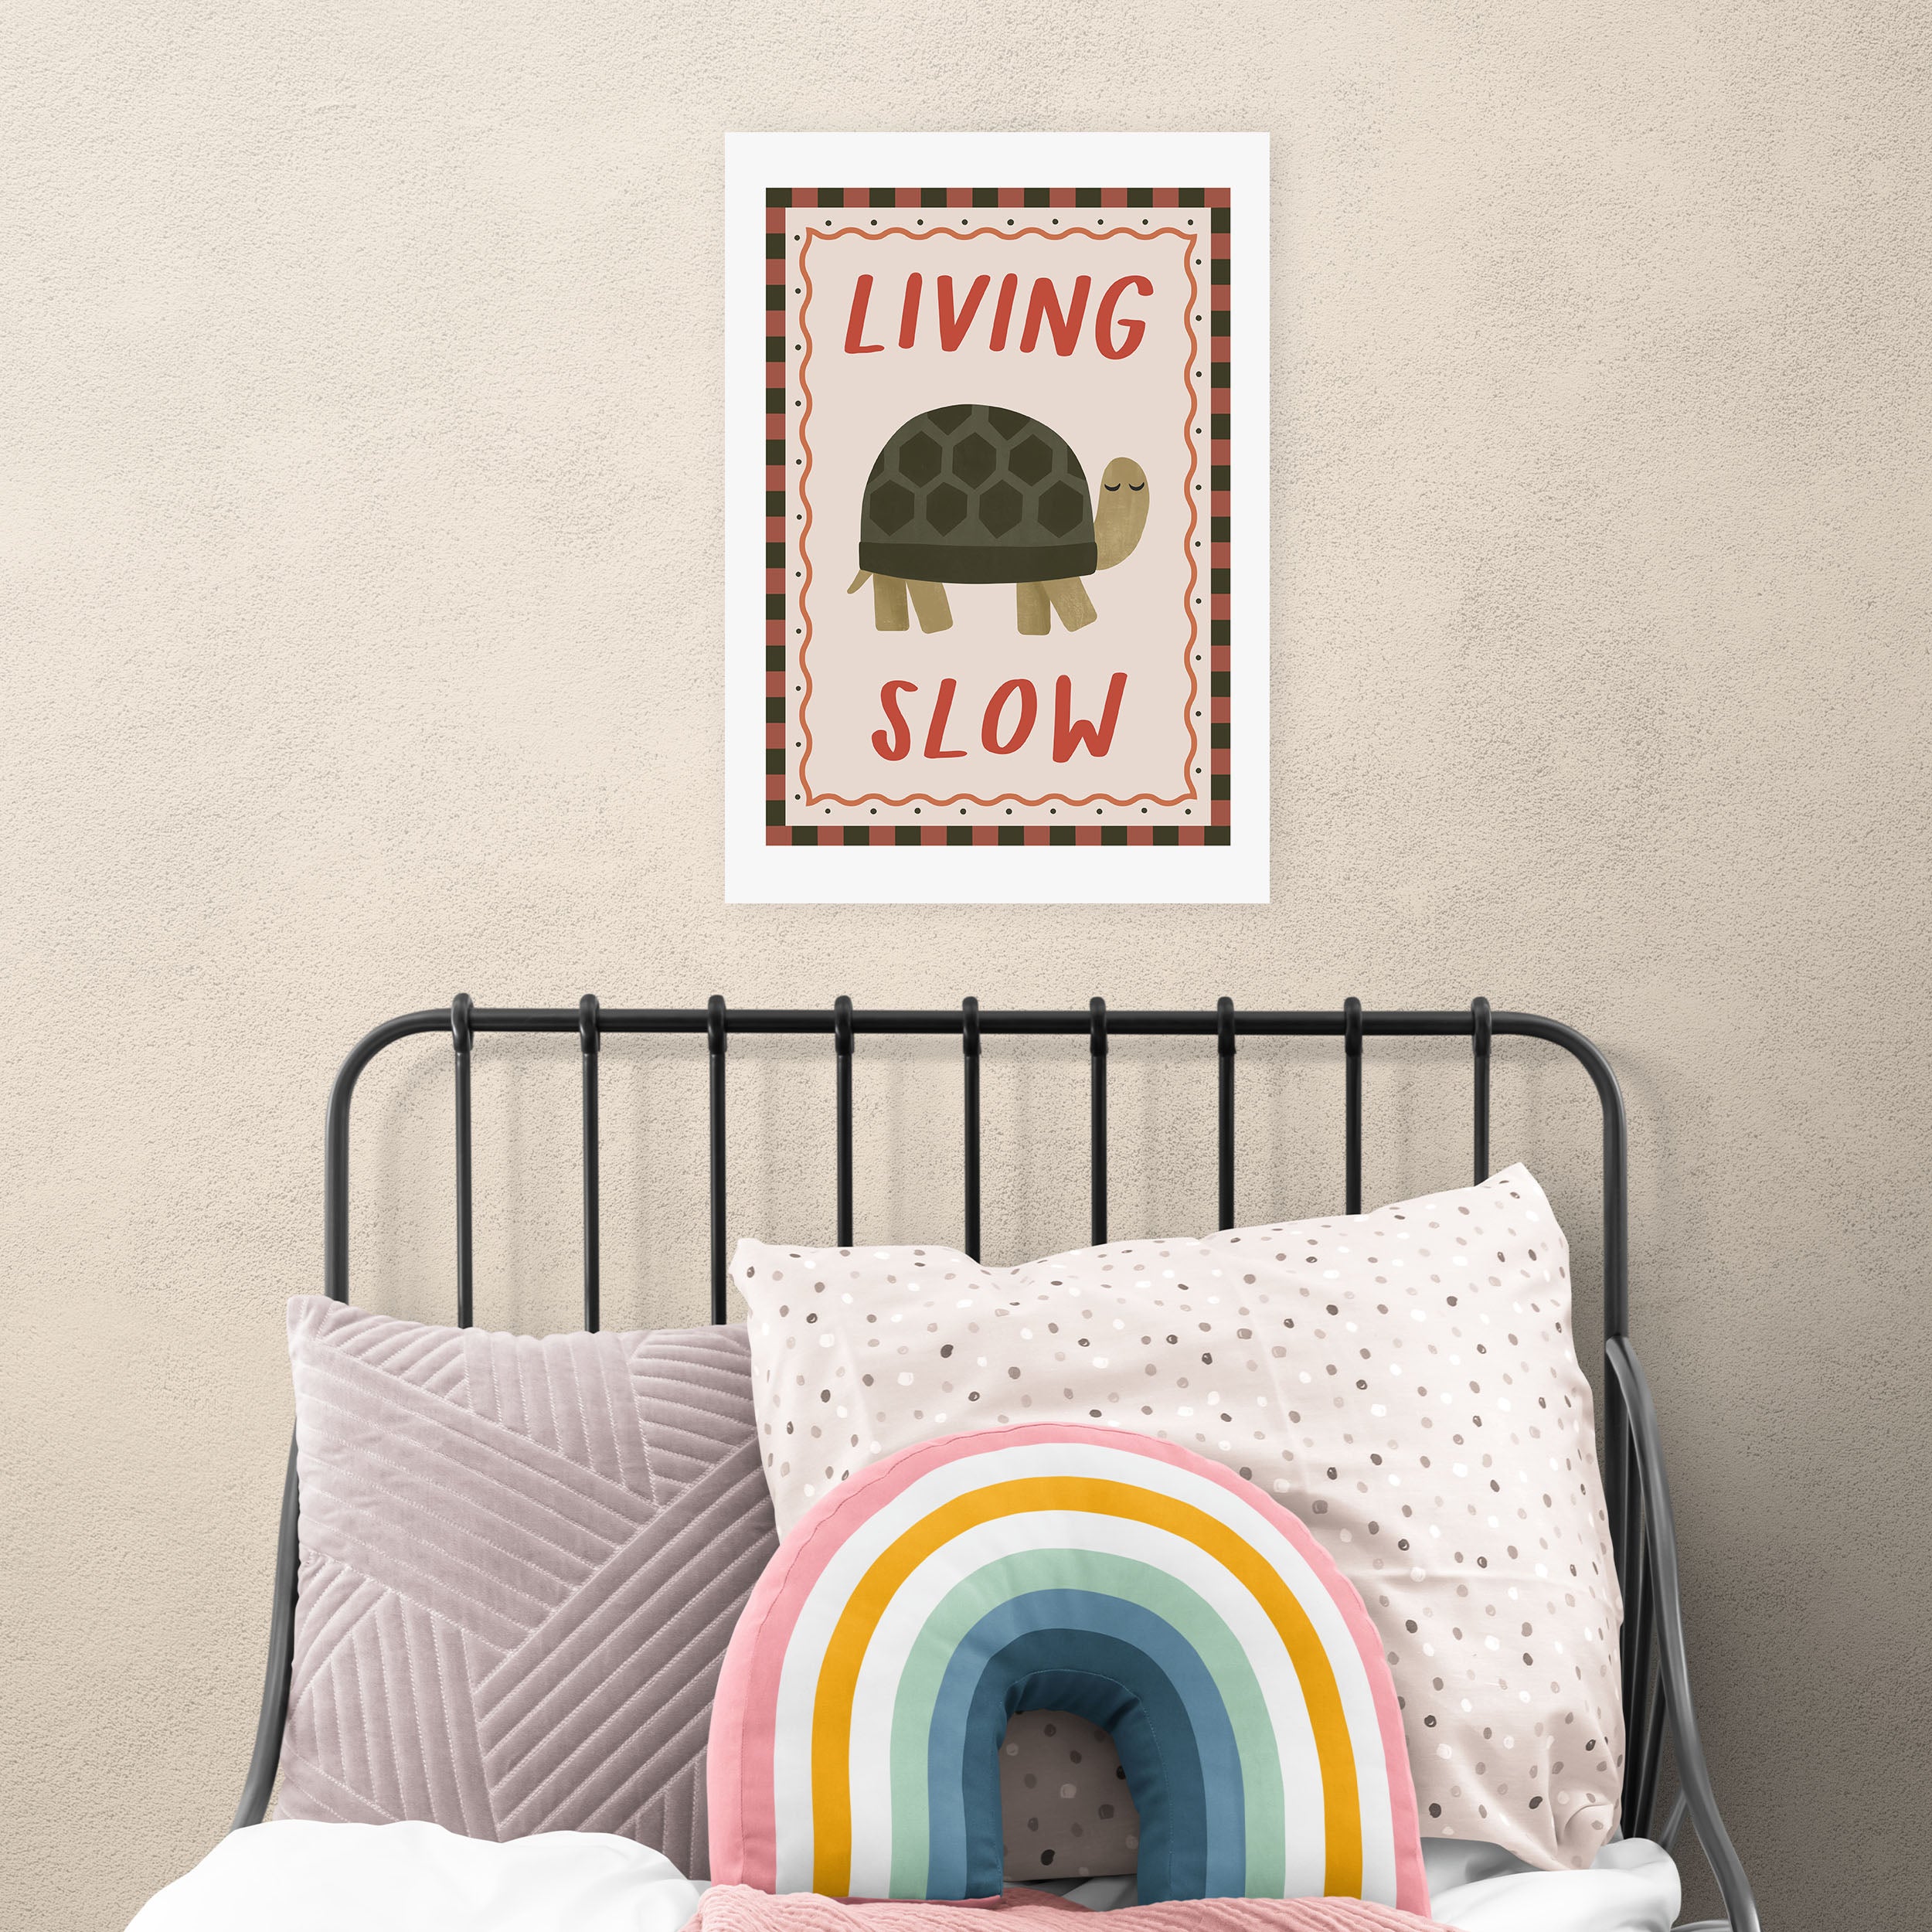 East End Prints Living Slow Print by Kid of the Village